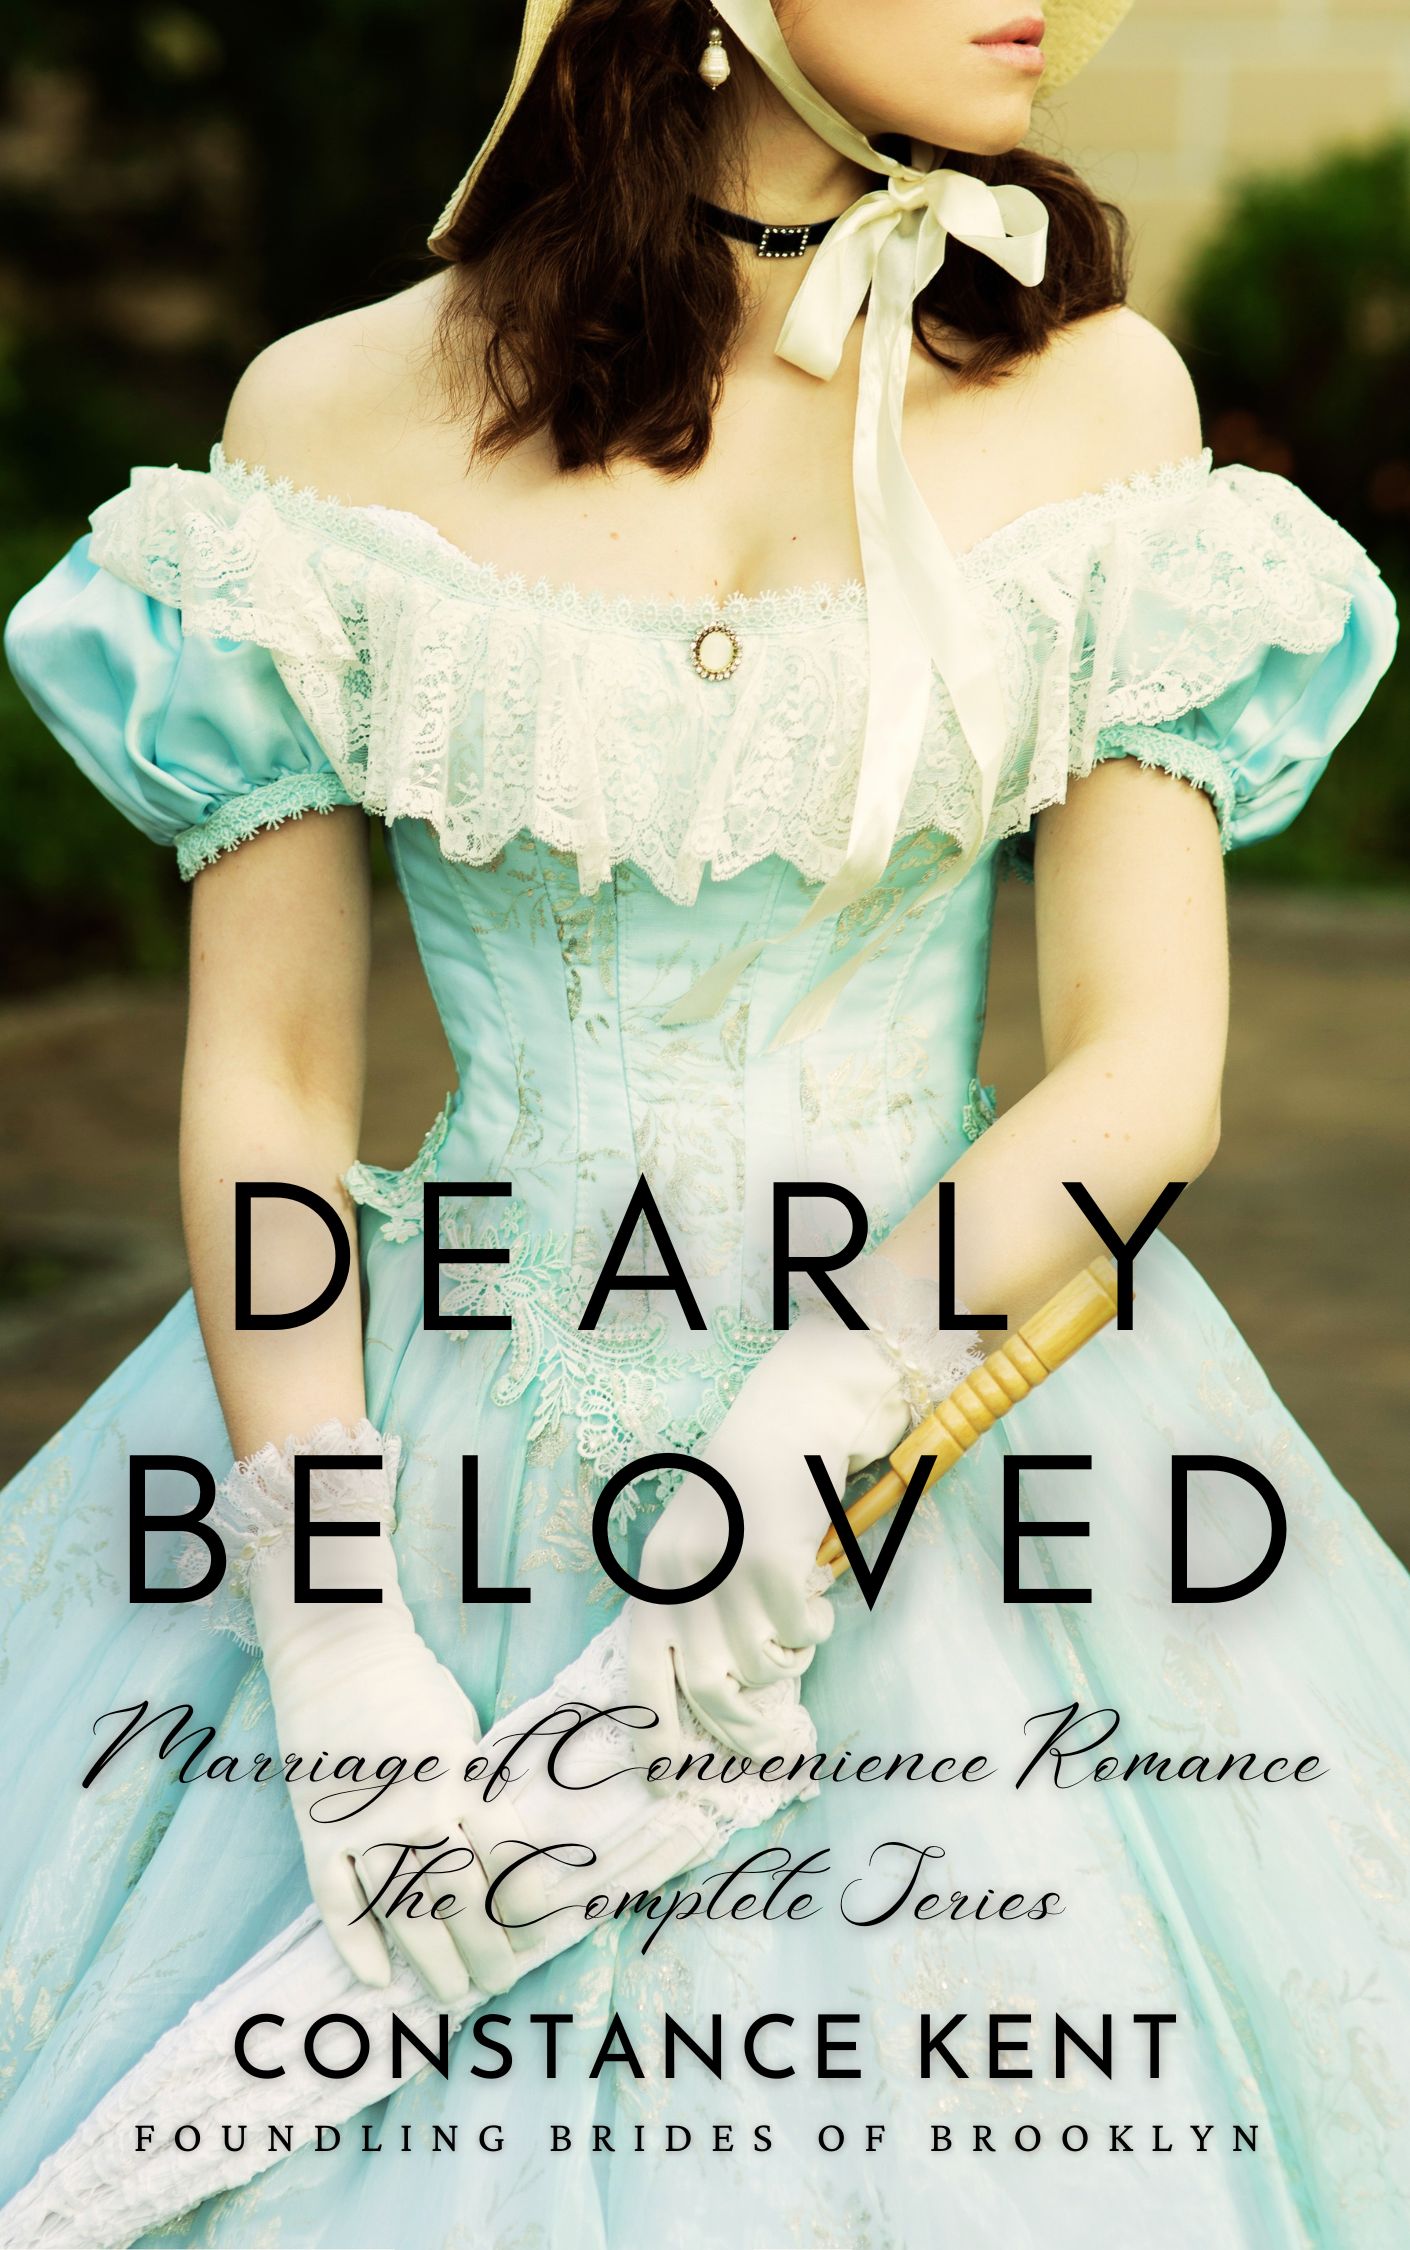 Dearly Beloved Marriage of Convenience Romance The Complete Series